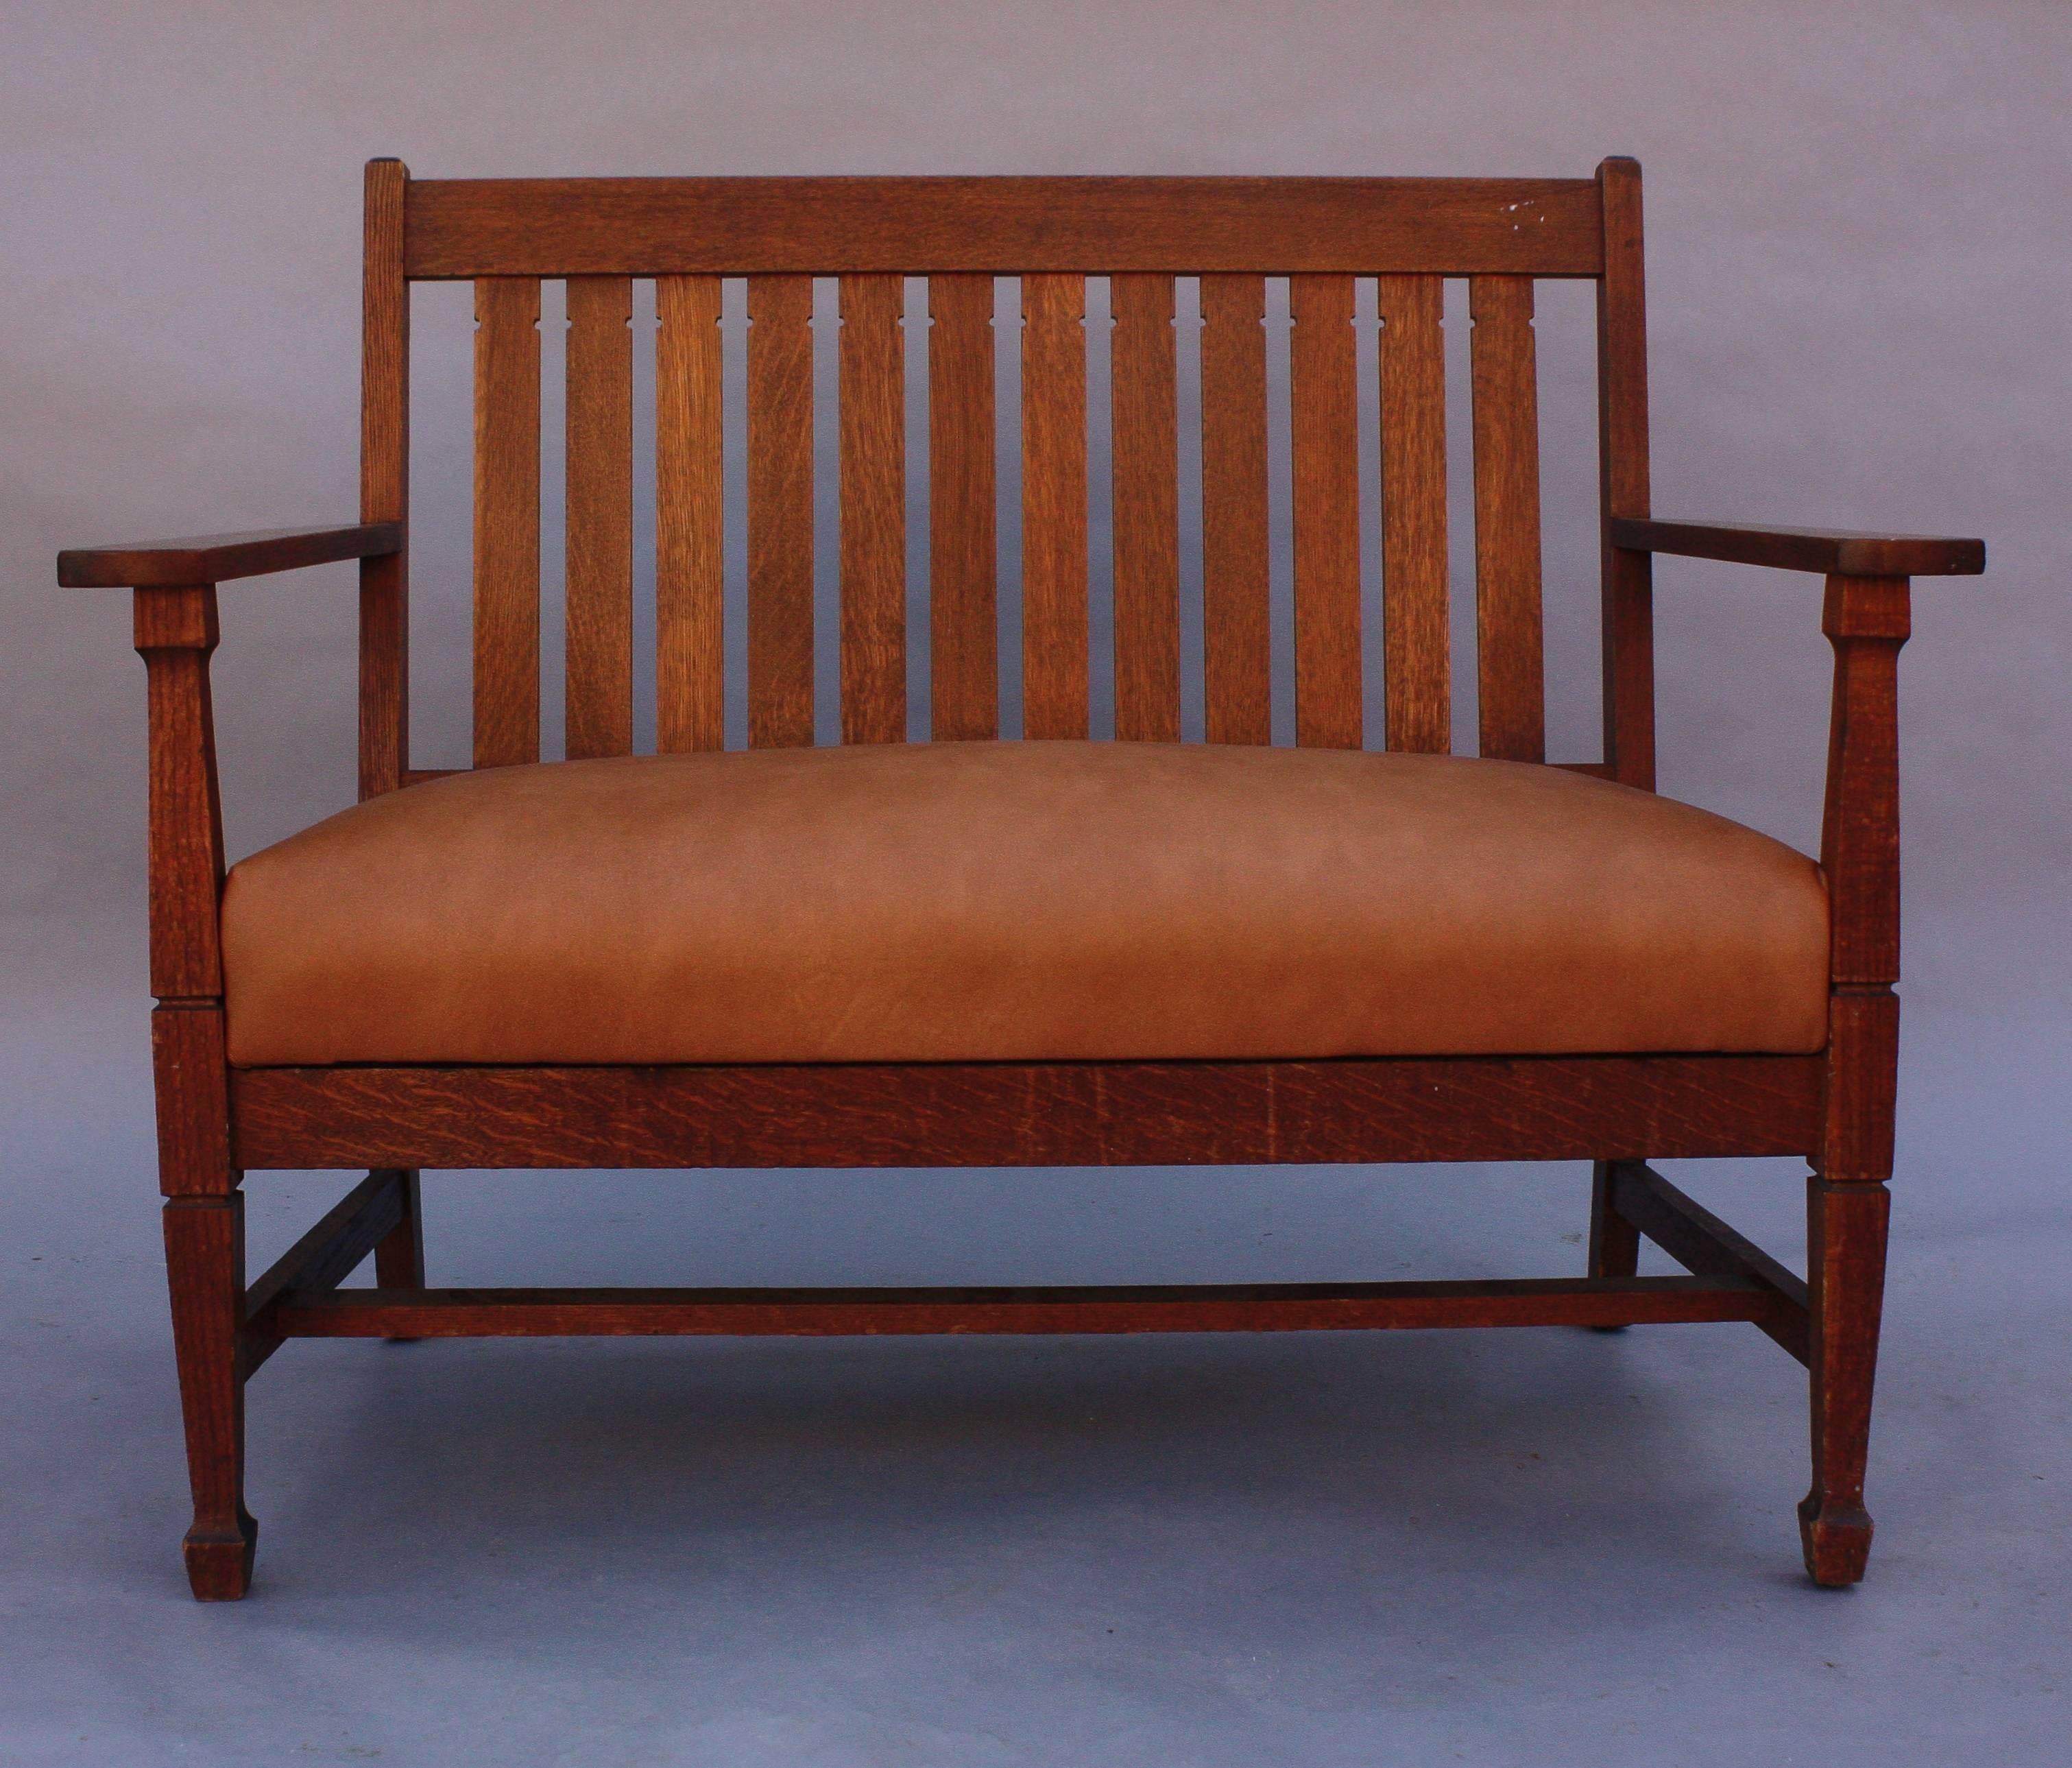 Oak settle with new leather upholstery, circa 1910.